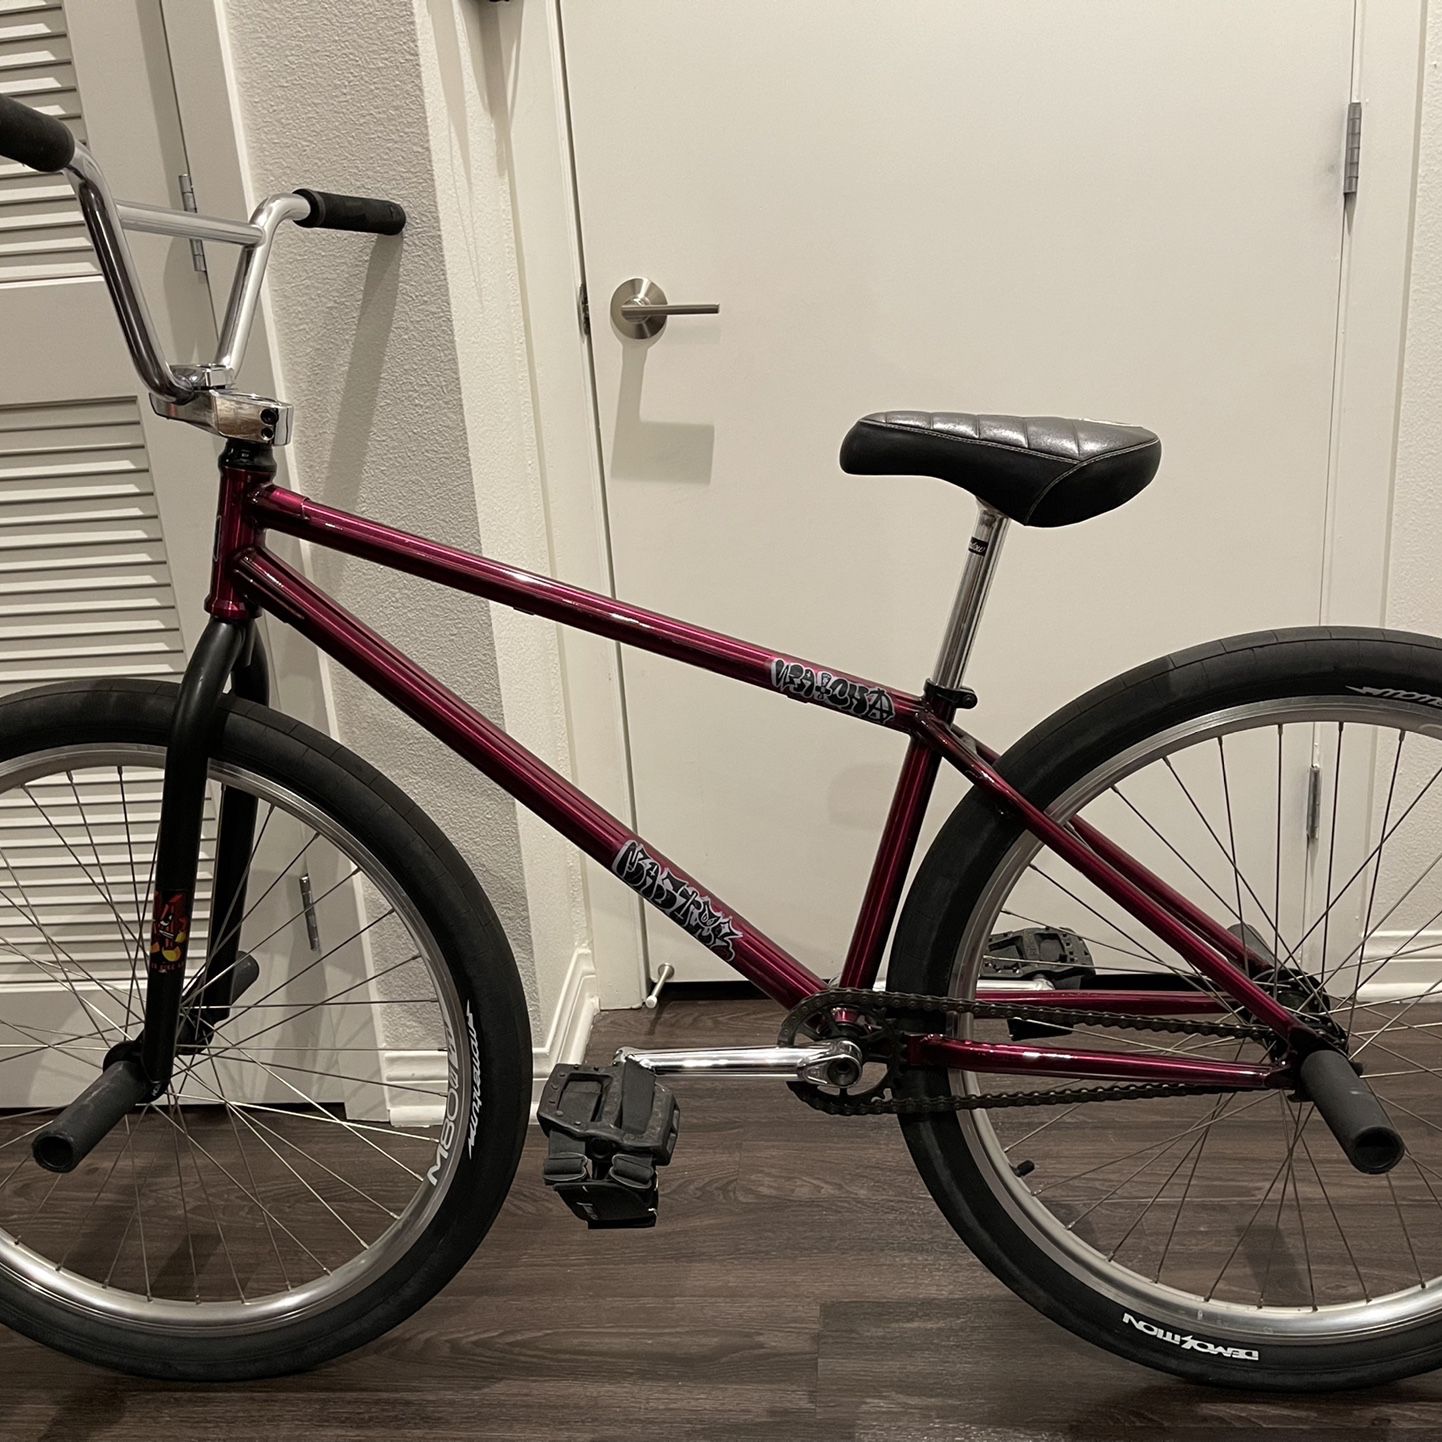 FGFS Master bike Co 26 for Sale in Anaheim, CA - OfferUp